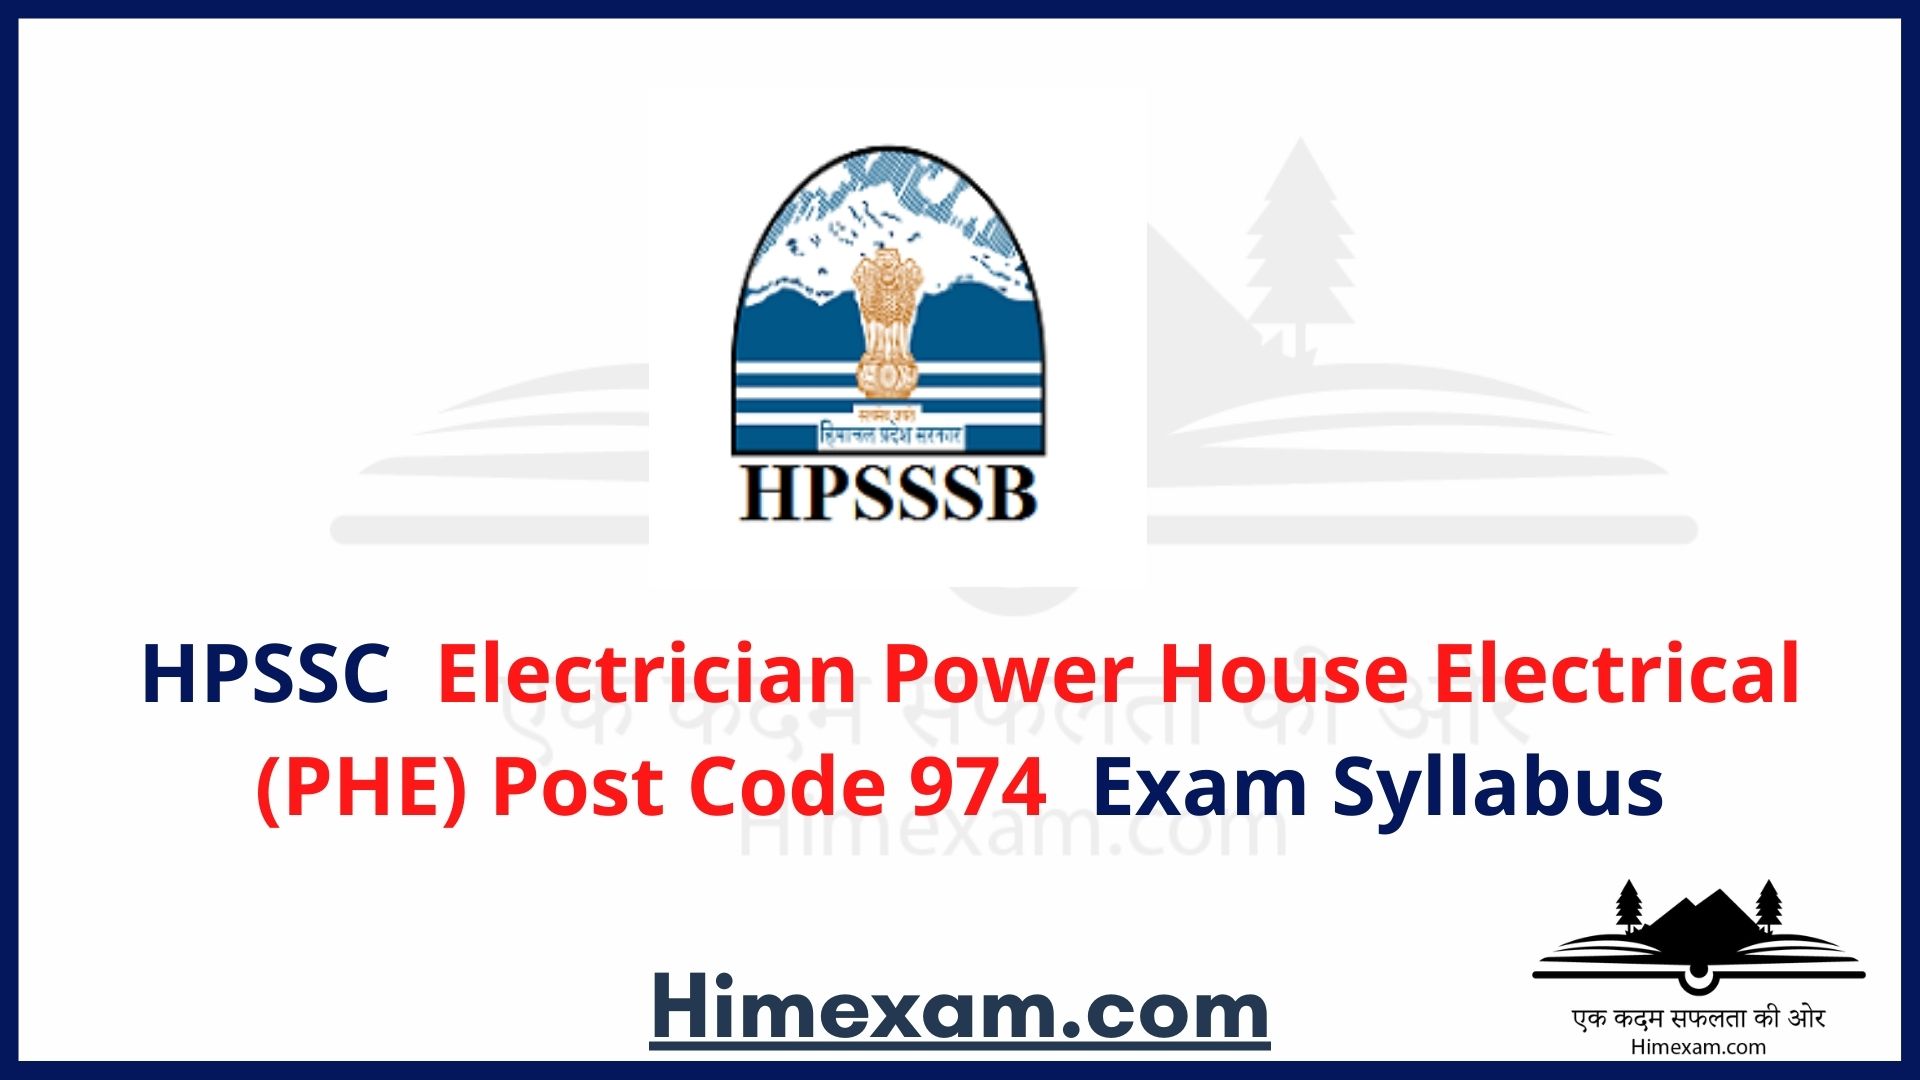 HPSSC Electrician Power House Electrical (PHE) Post Code 974 Exam Syllabus